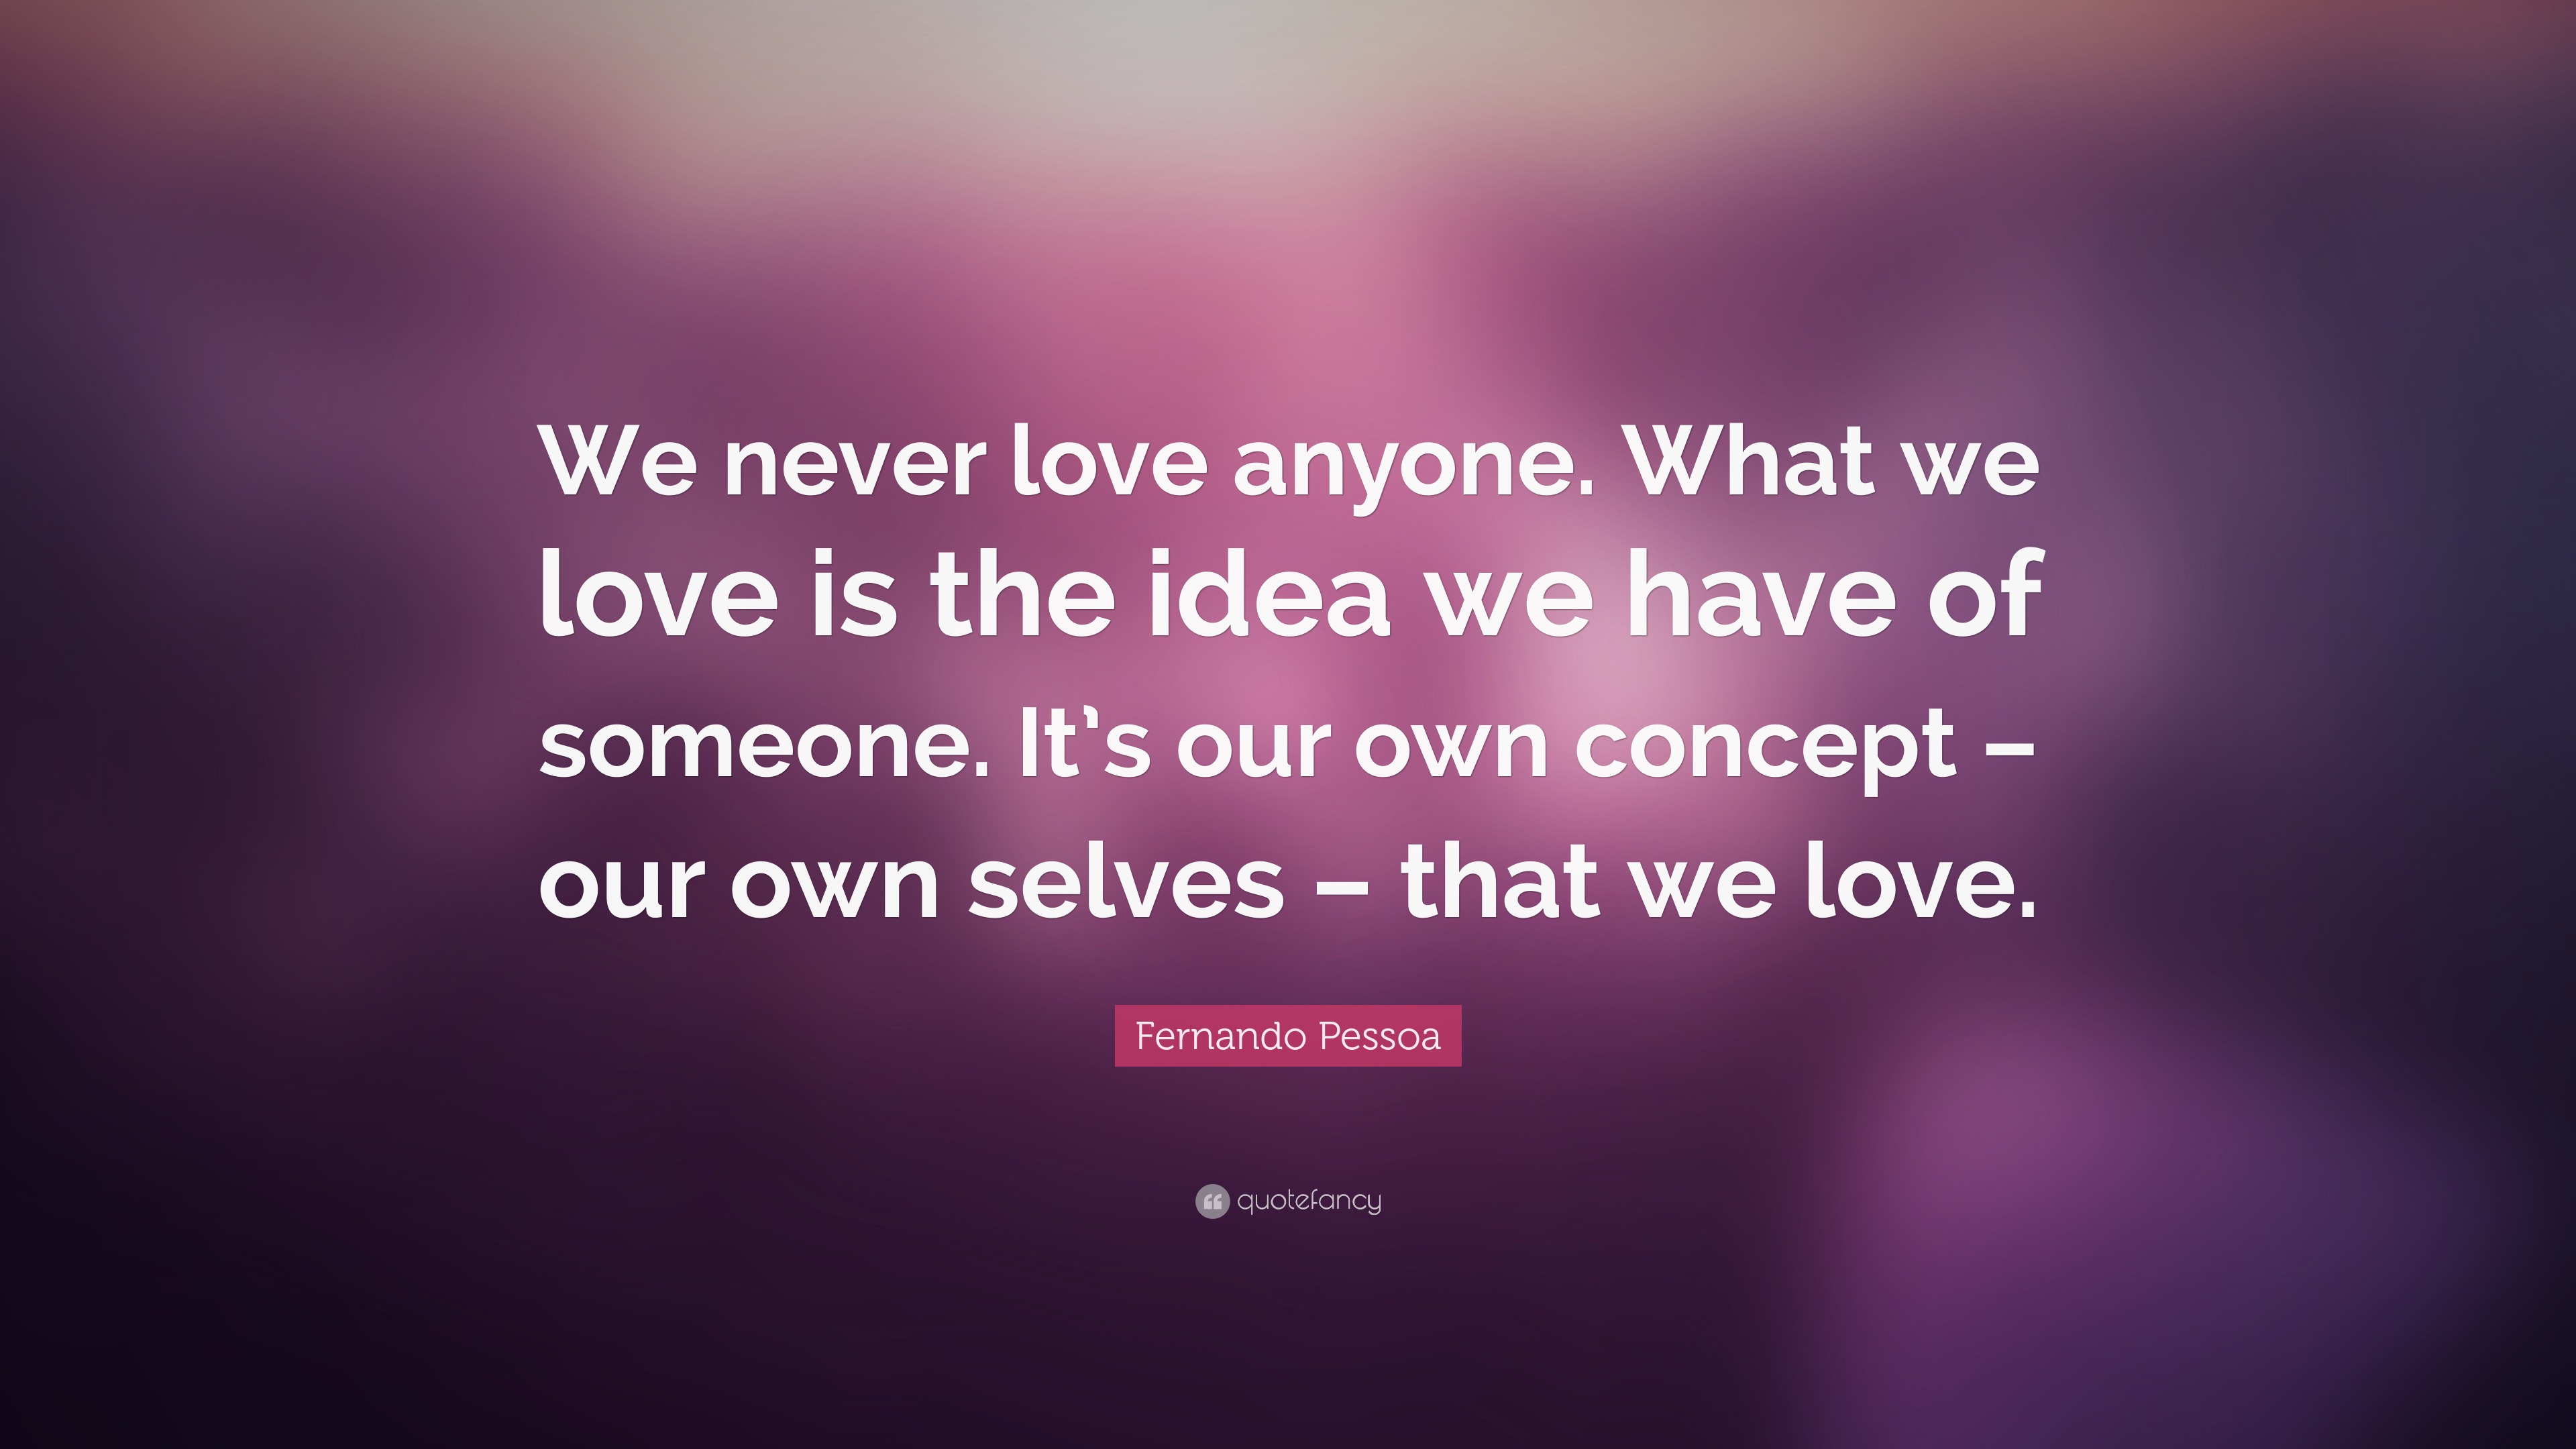 Fernando Pessoa Quote: “We never love anyone. What we love is the idea ...